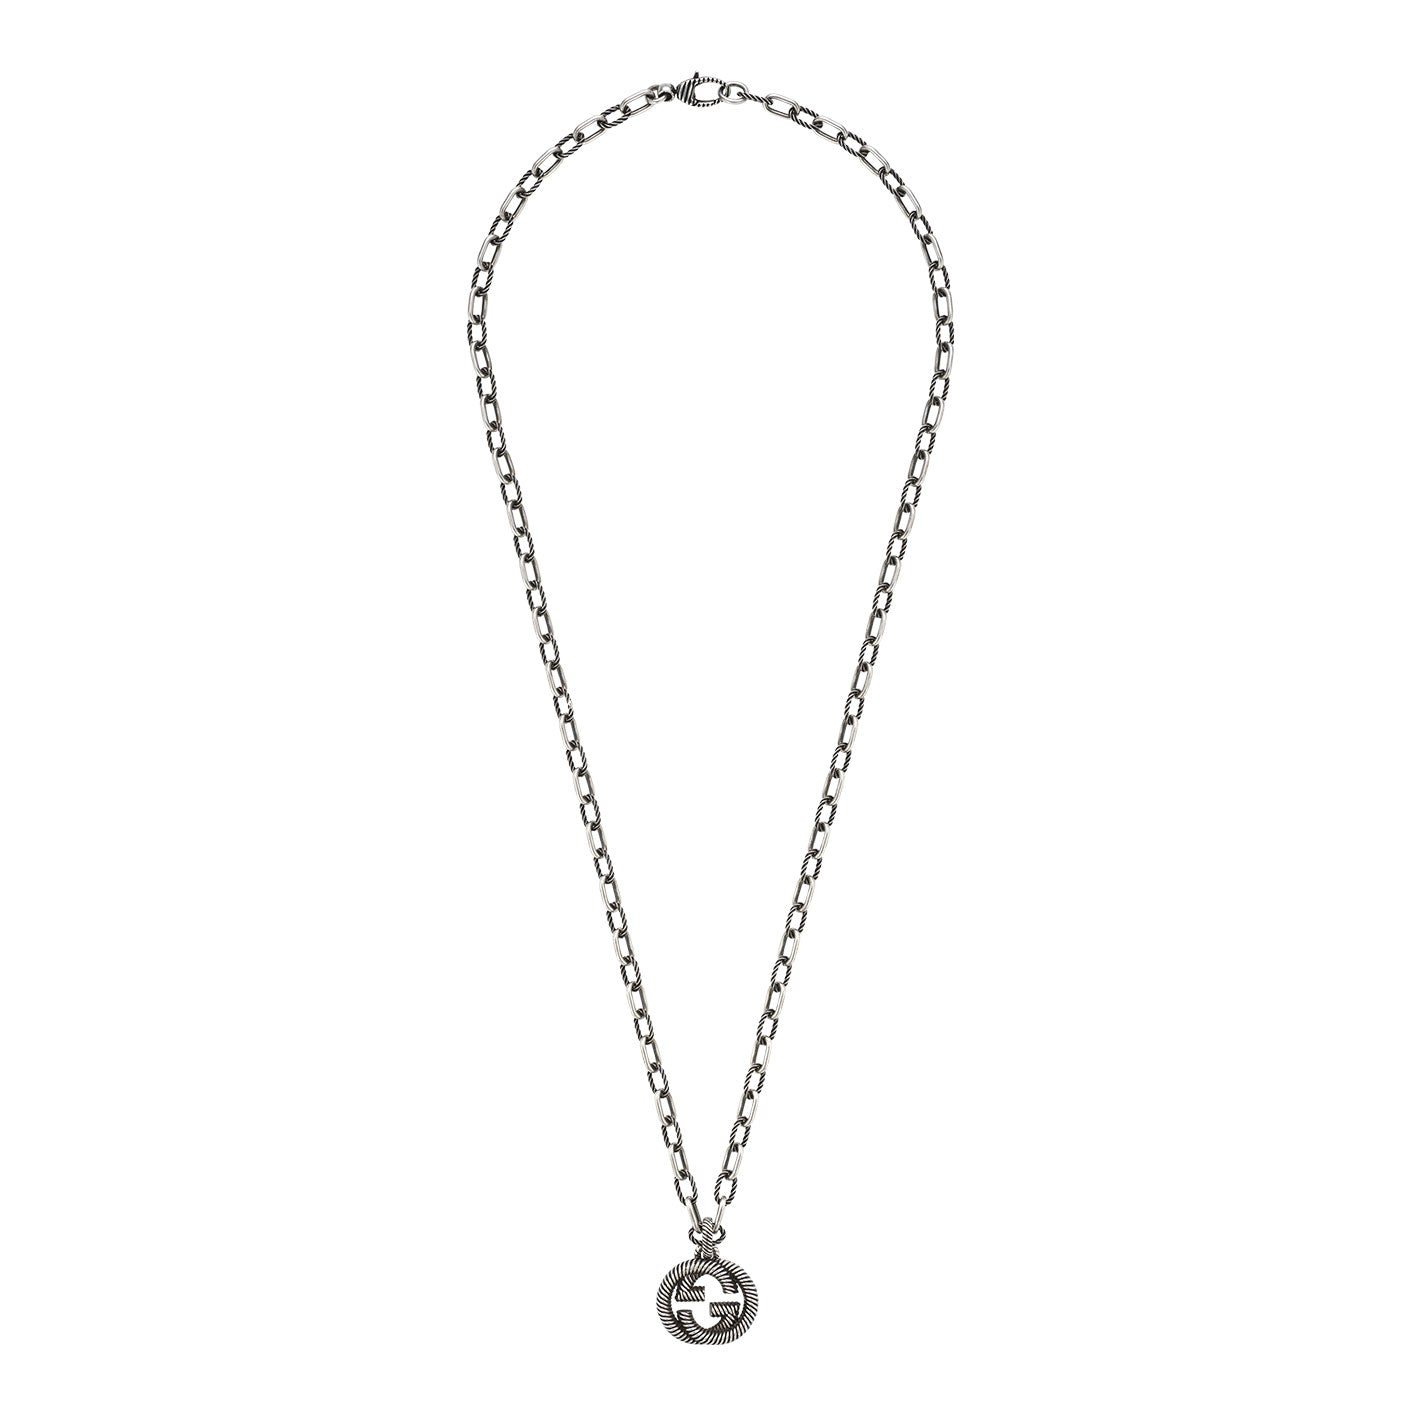 Gucci Interlocking G Aged Sterling Silver Necklace Pendant